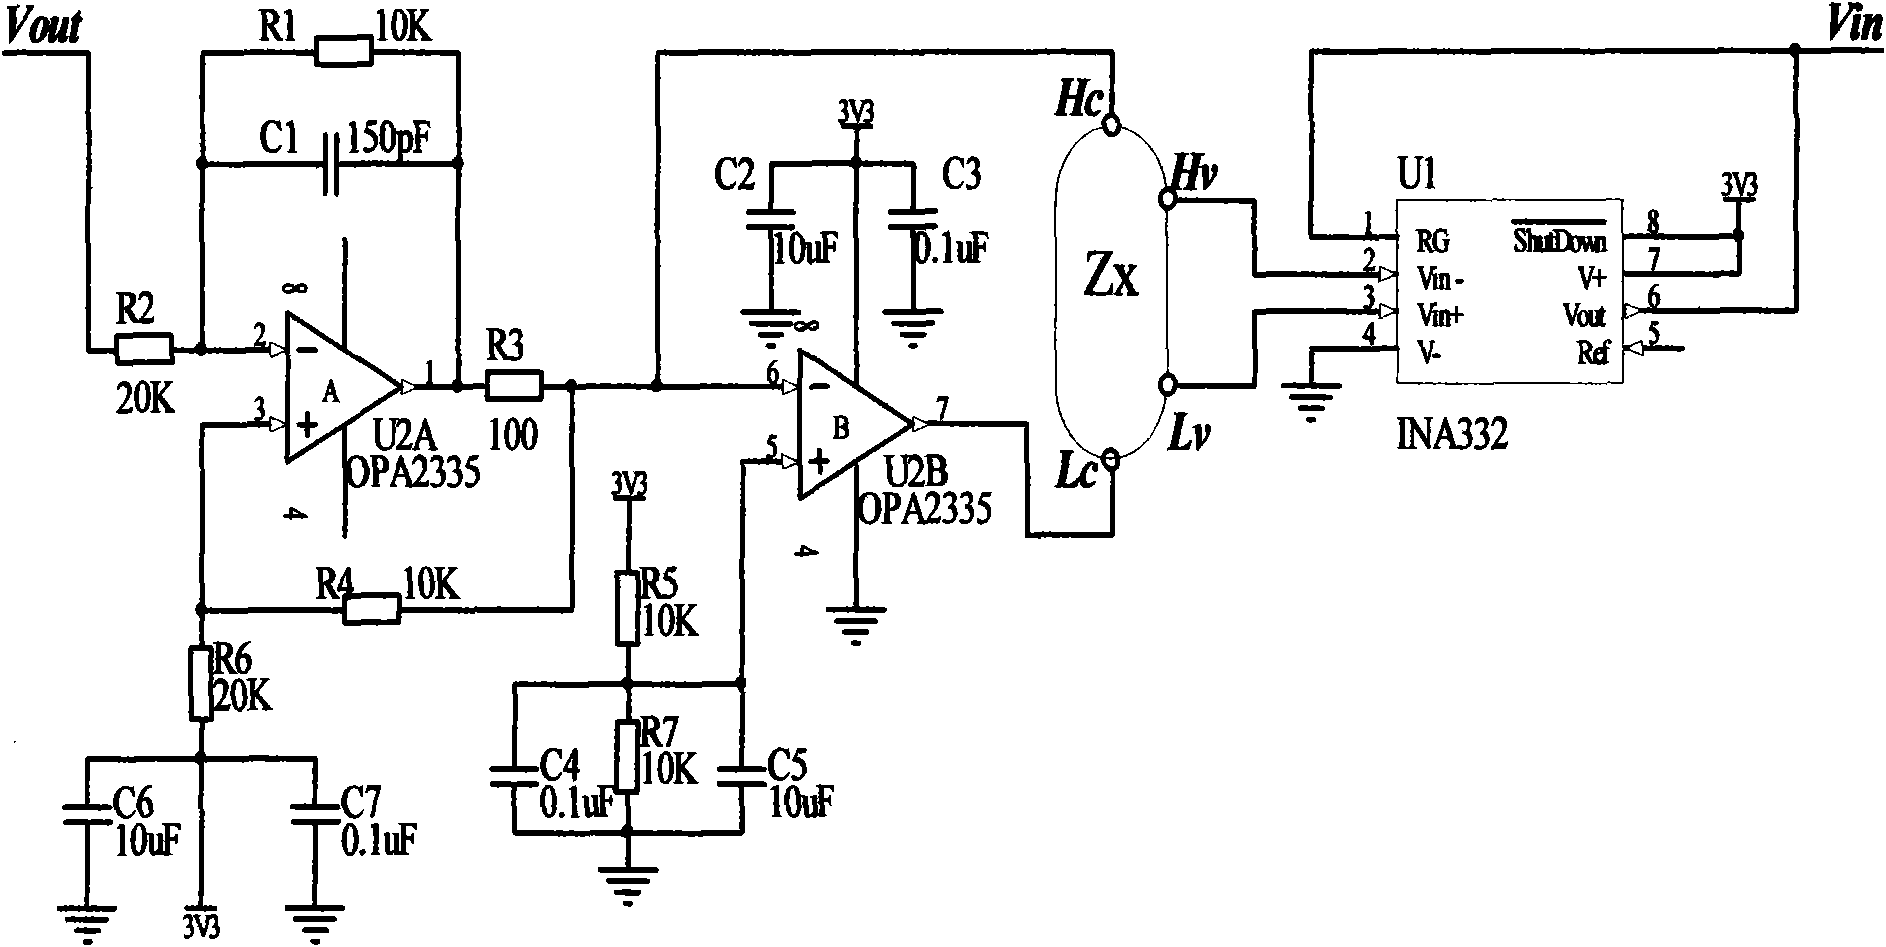 Palm bioelectrical impedance spectrum measuring device for biological characteristic recognition